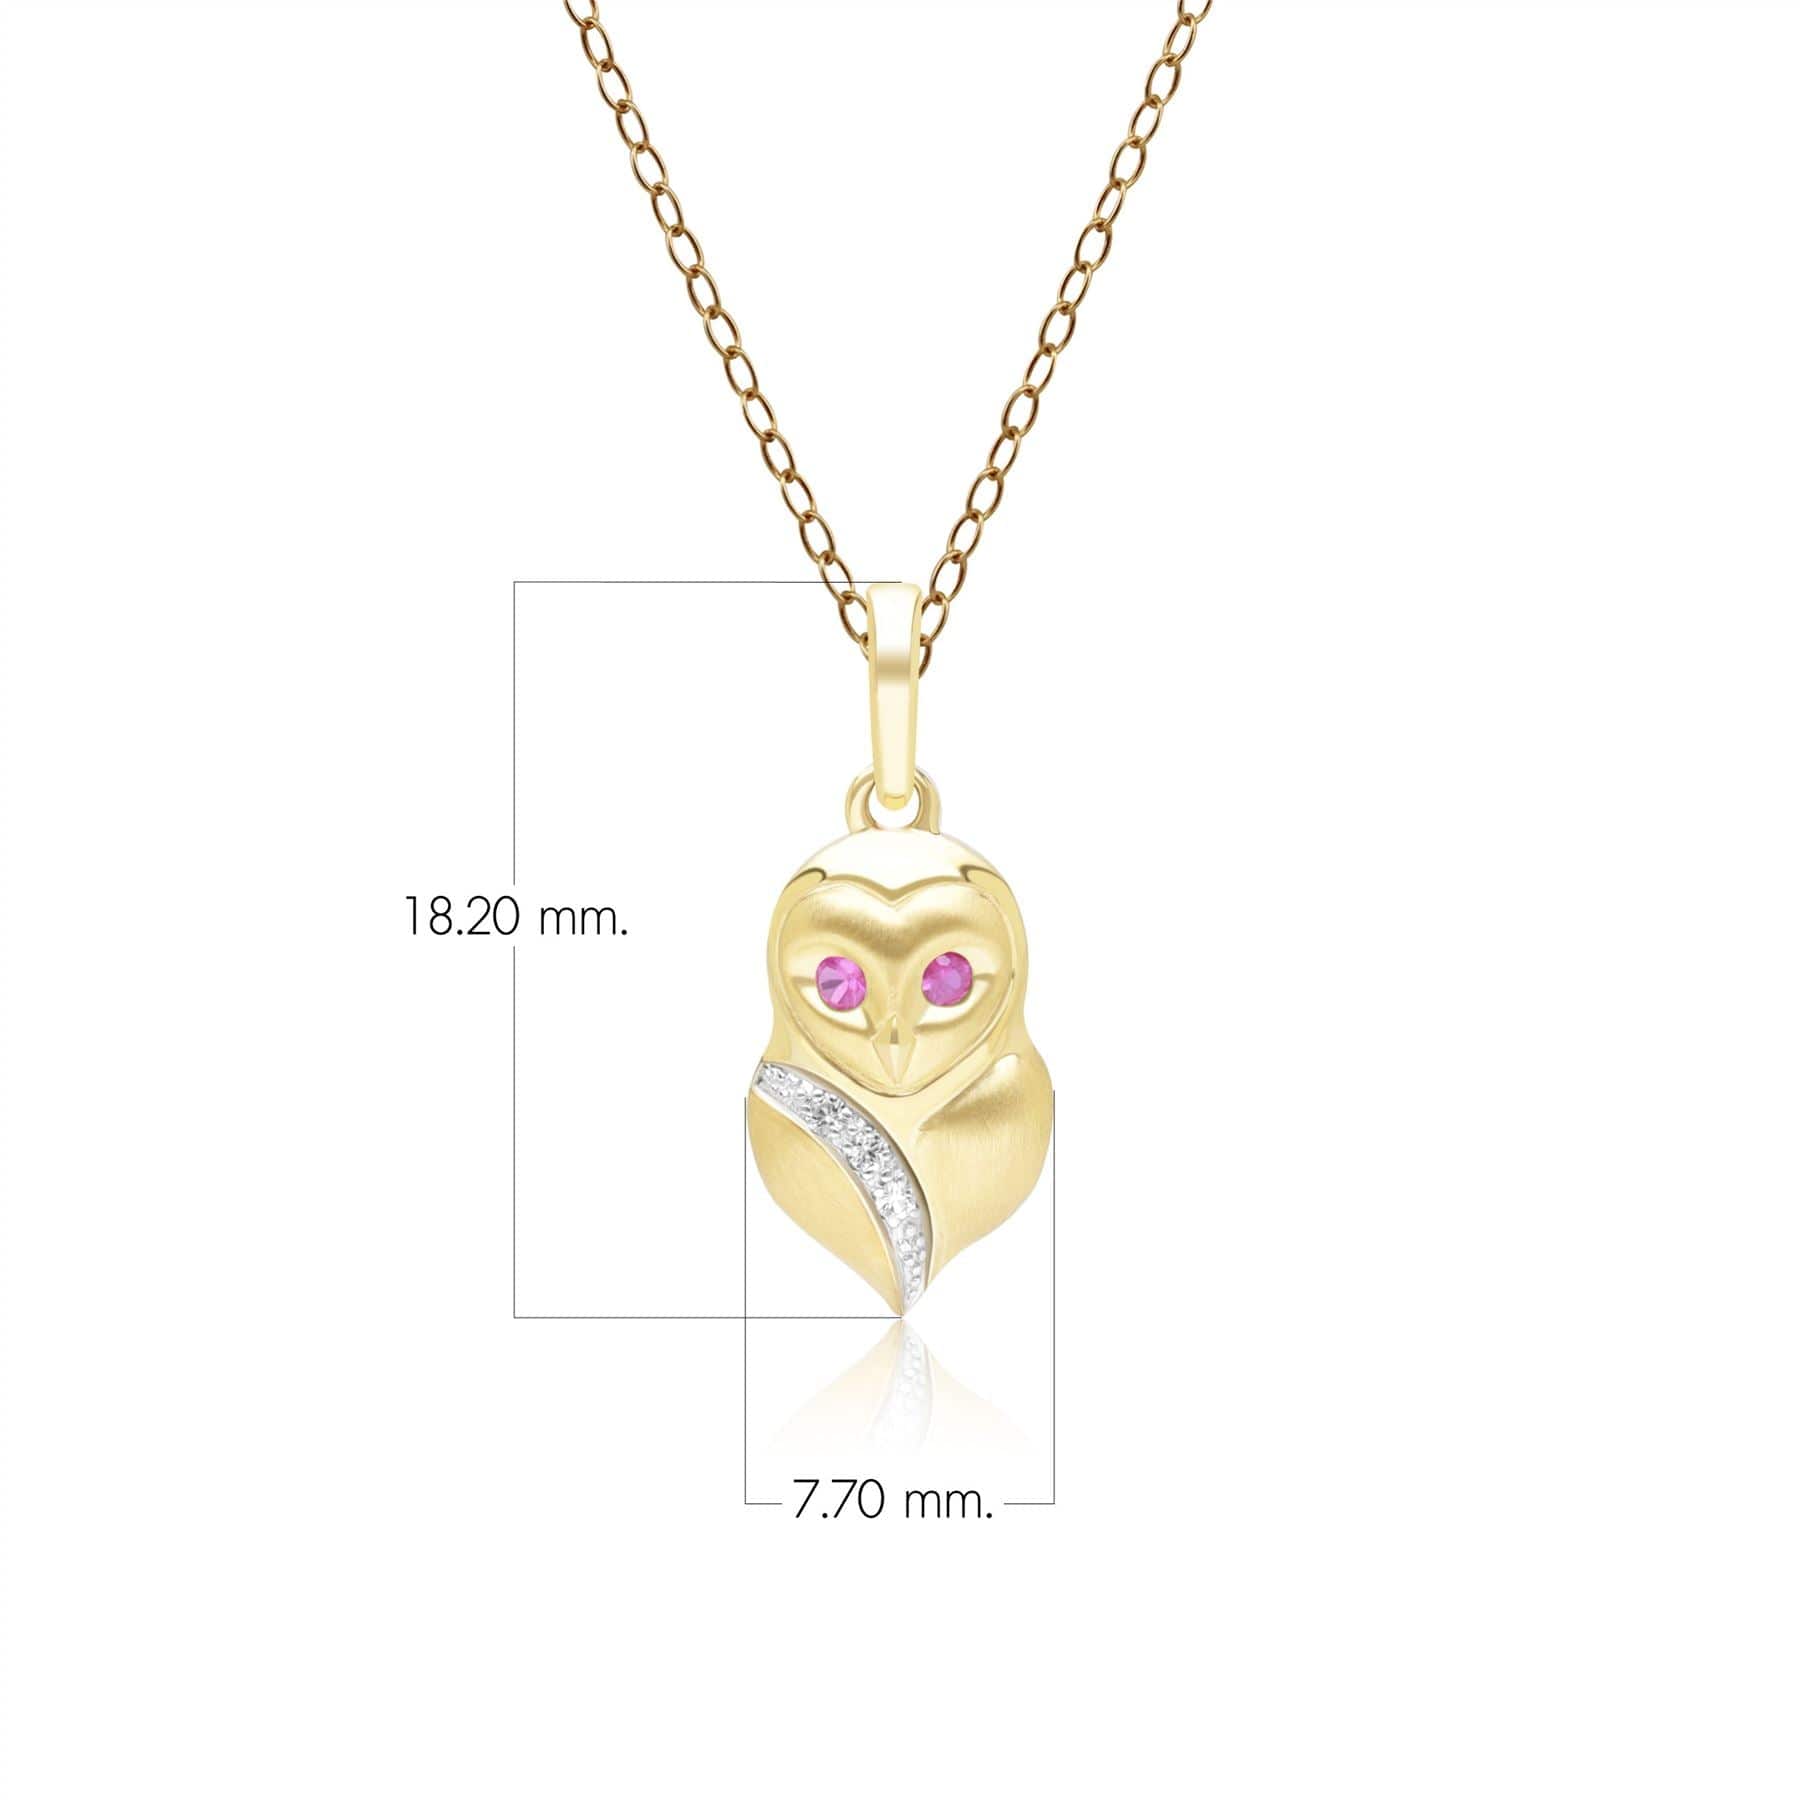 135P2128019 Gardenia Ruby and White Sapphire Owl Pendant Necklace in 9ct Yellow Gold Dimensions